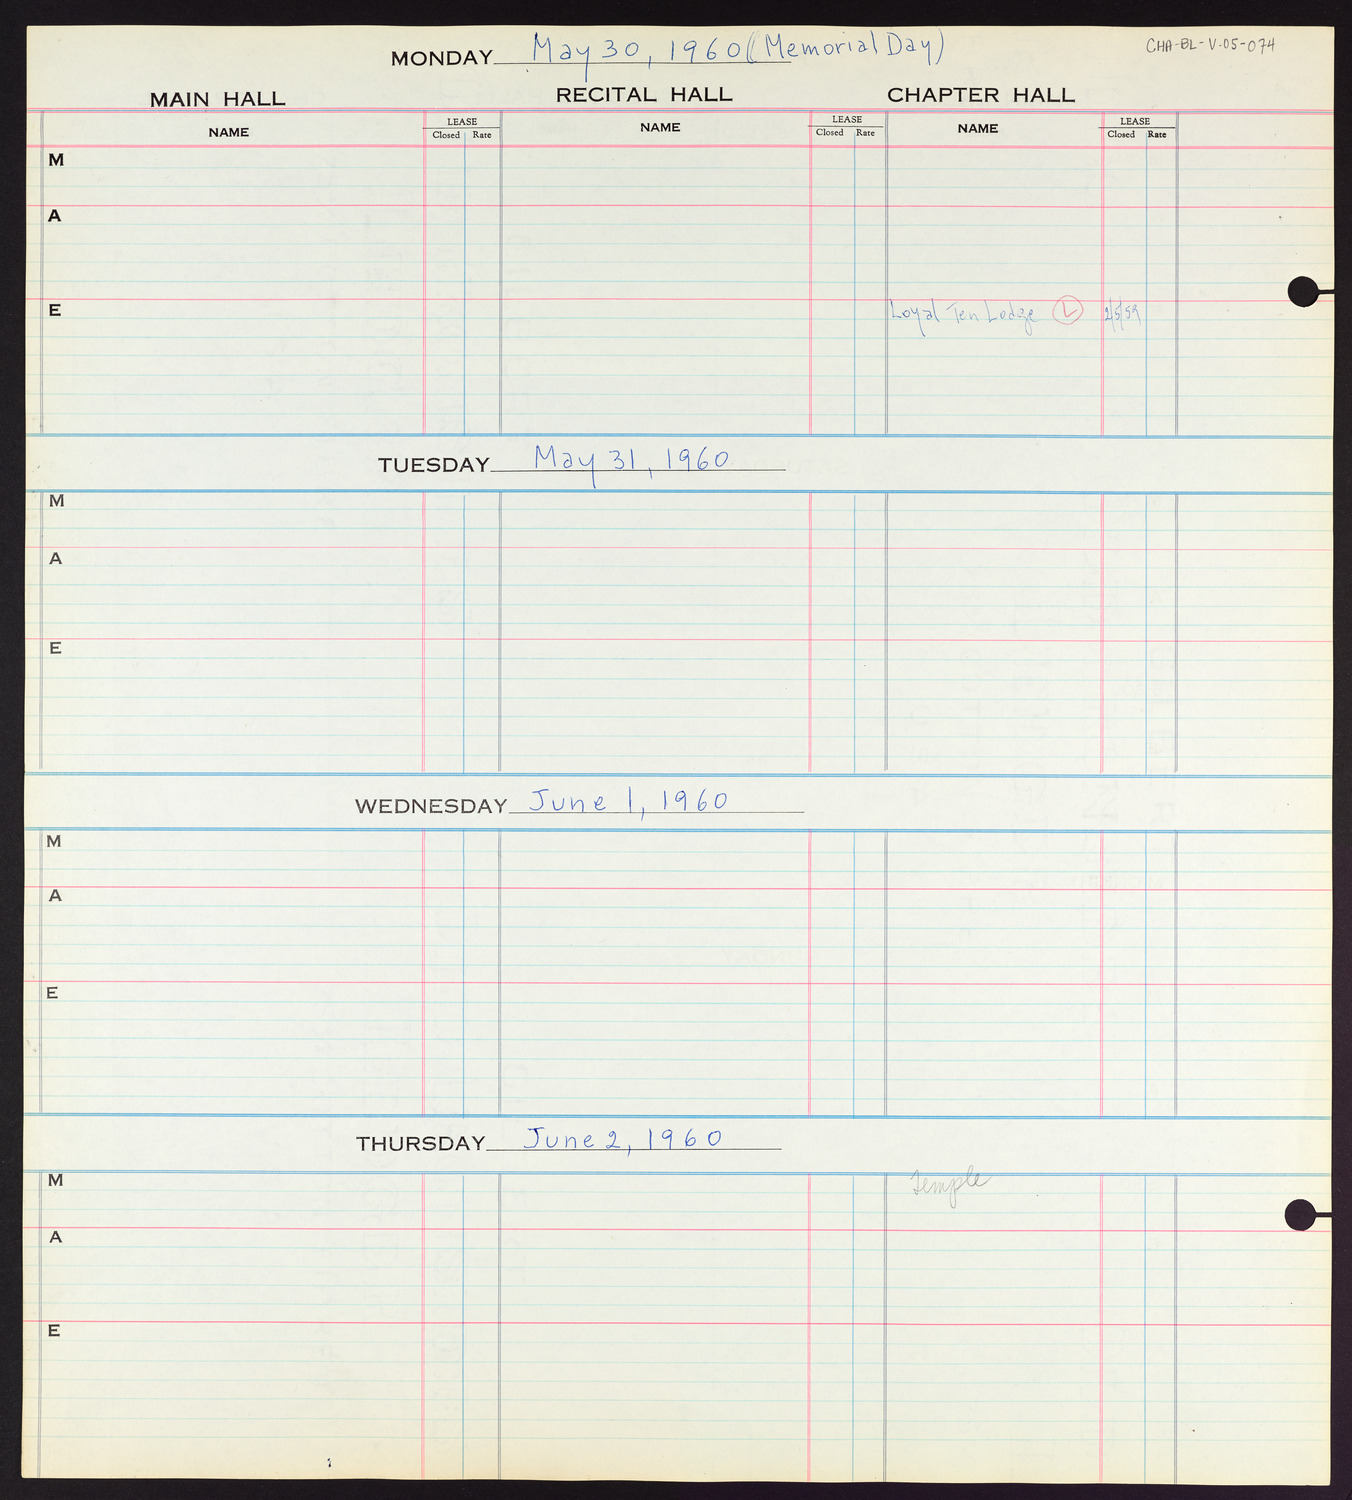 Carnegie Hall Booking Ledger, volume 5, page 74